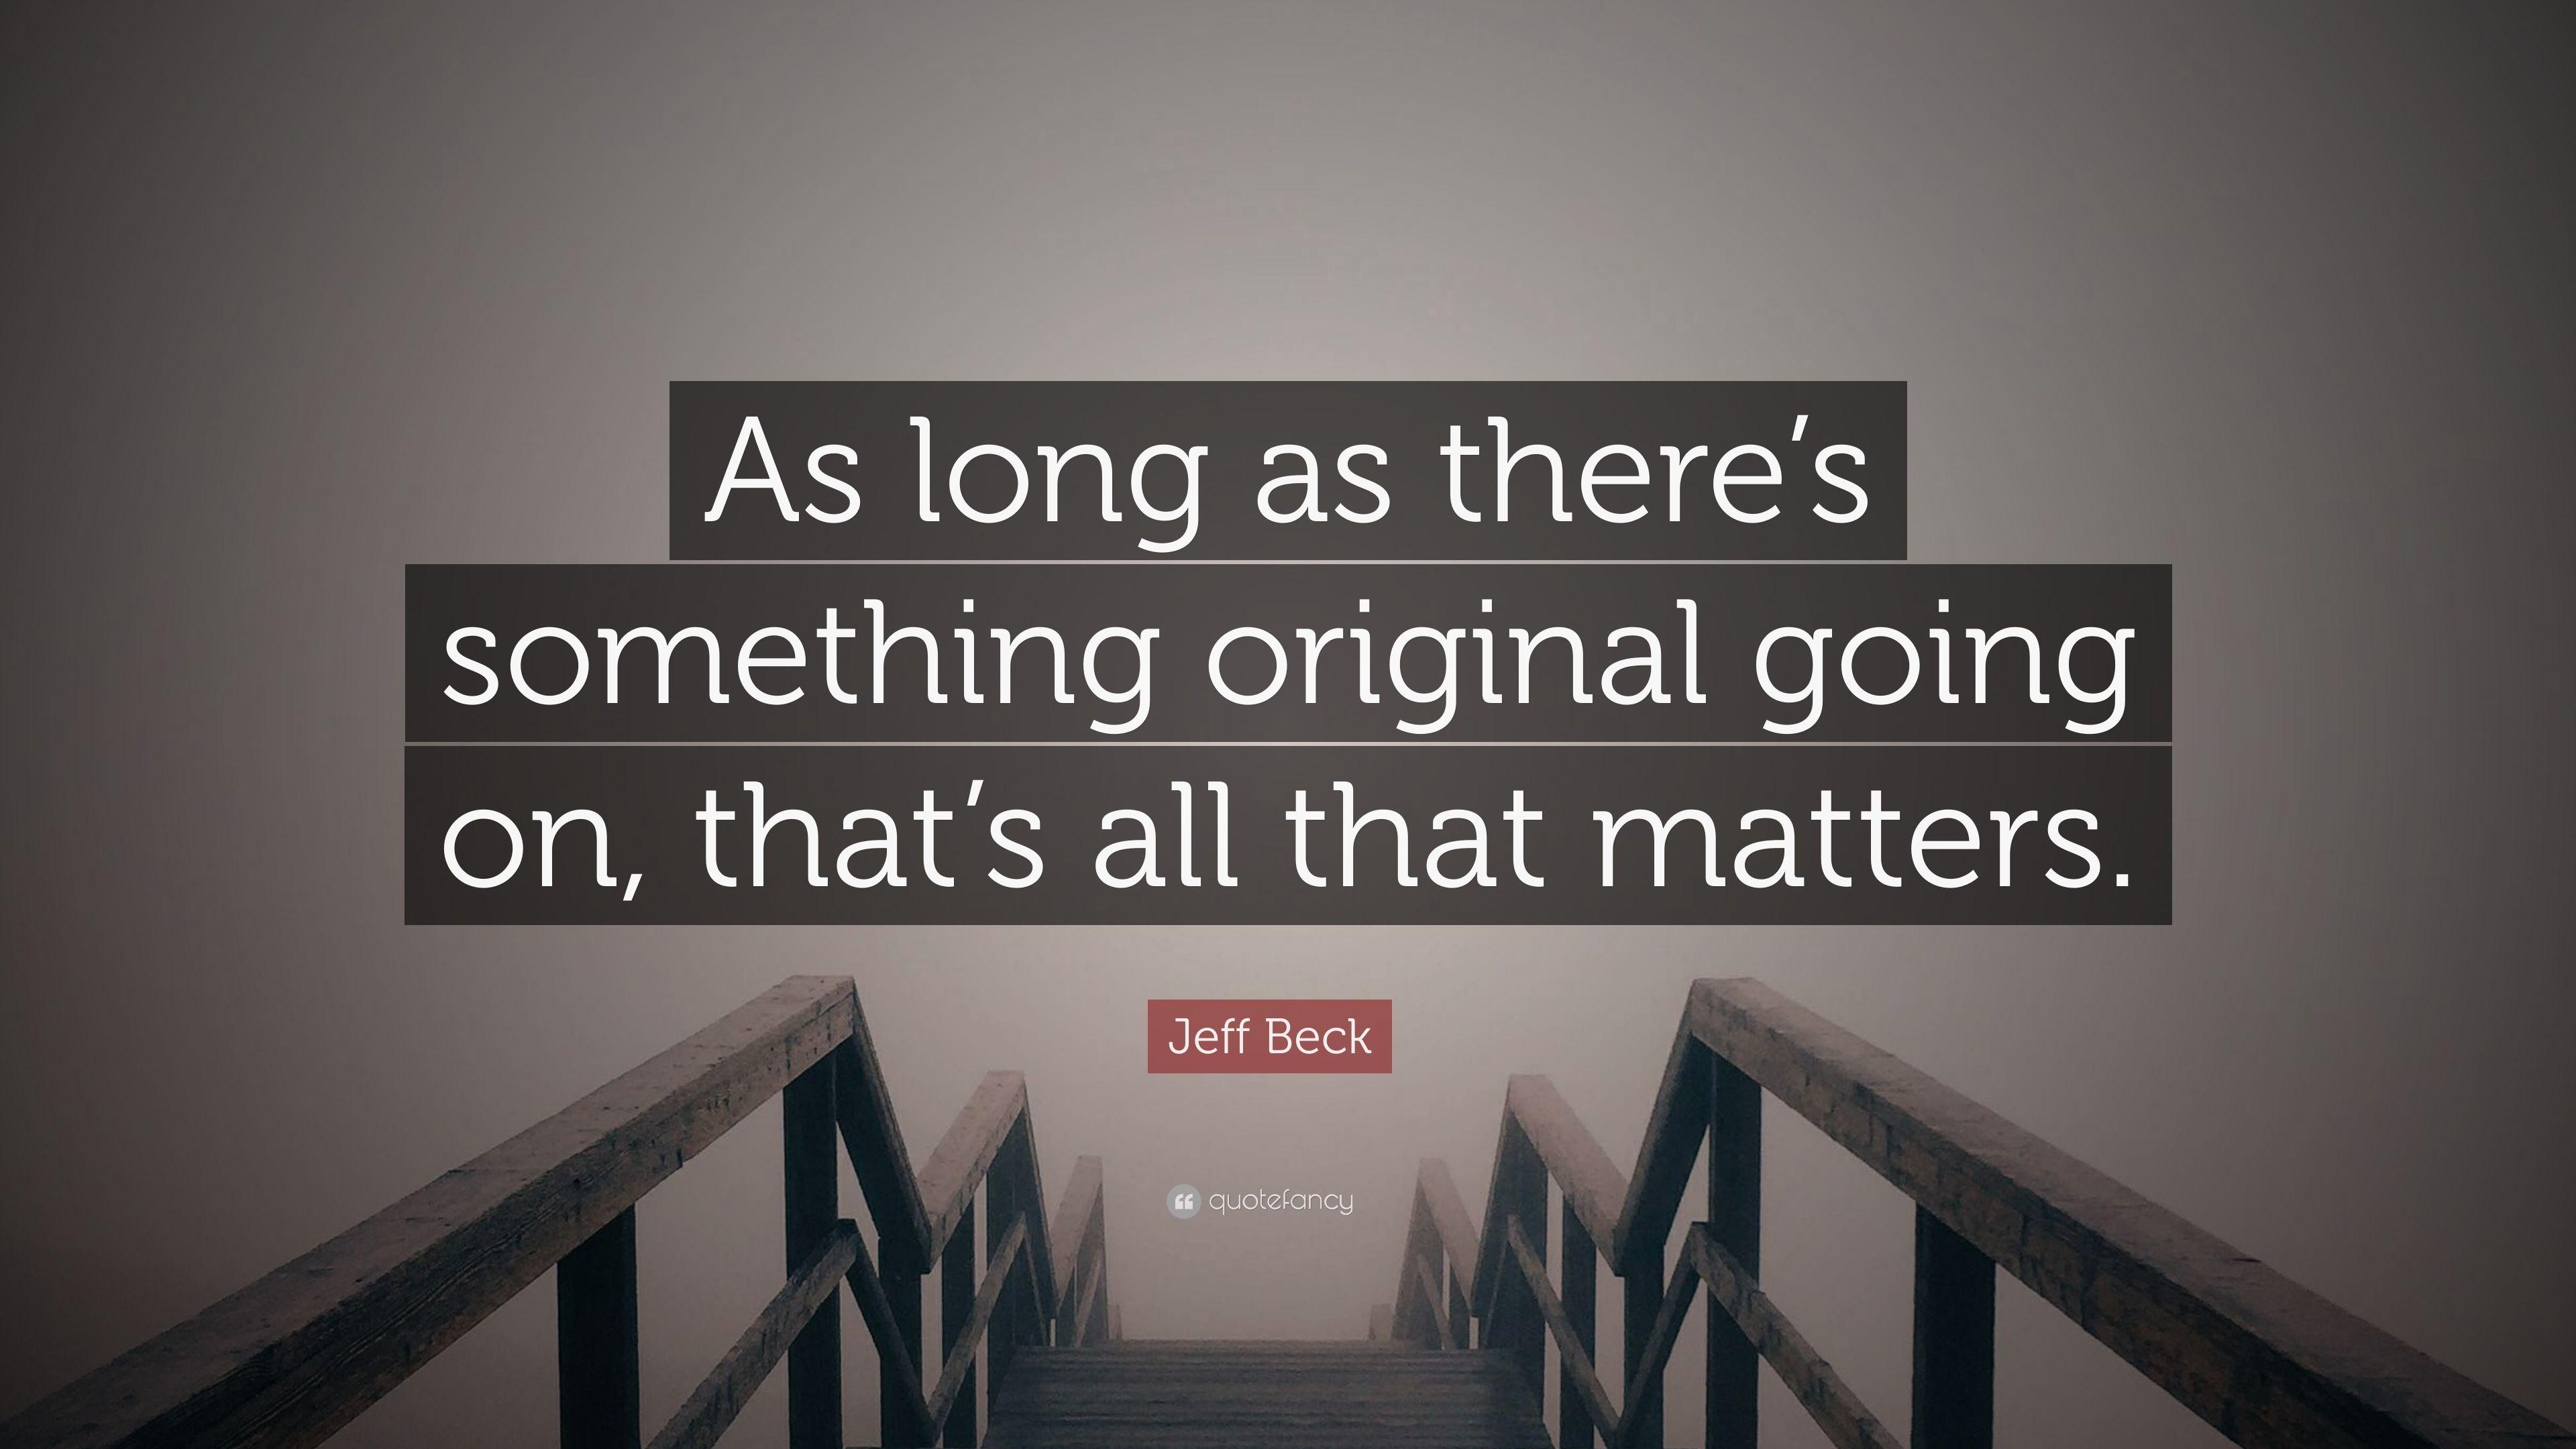 Jeff Beck Quote: “As long as there's something original going